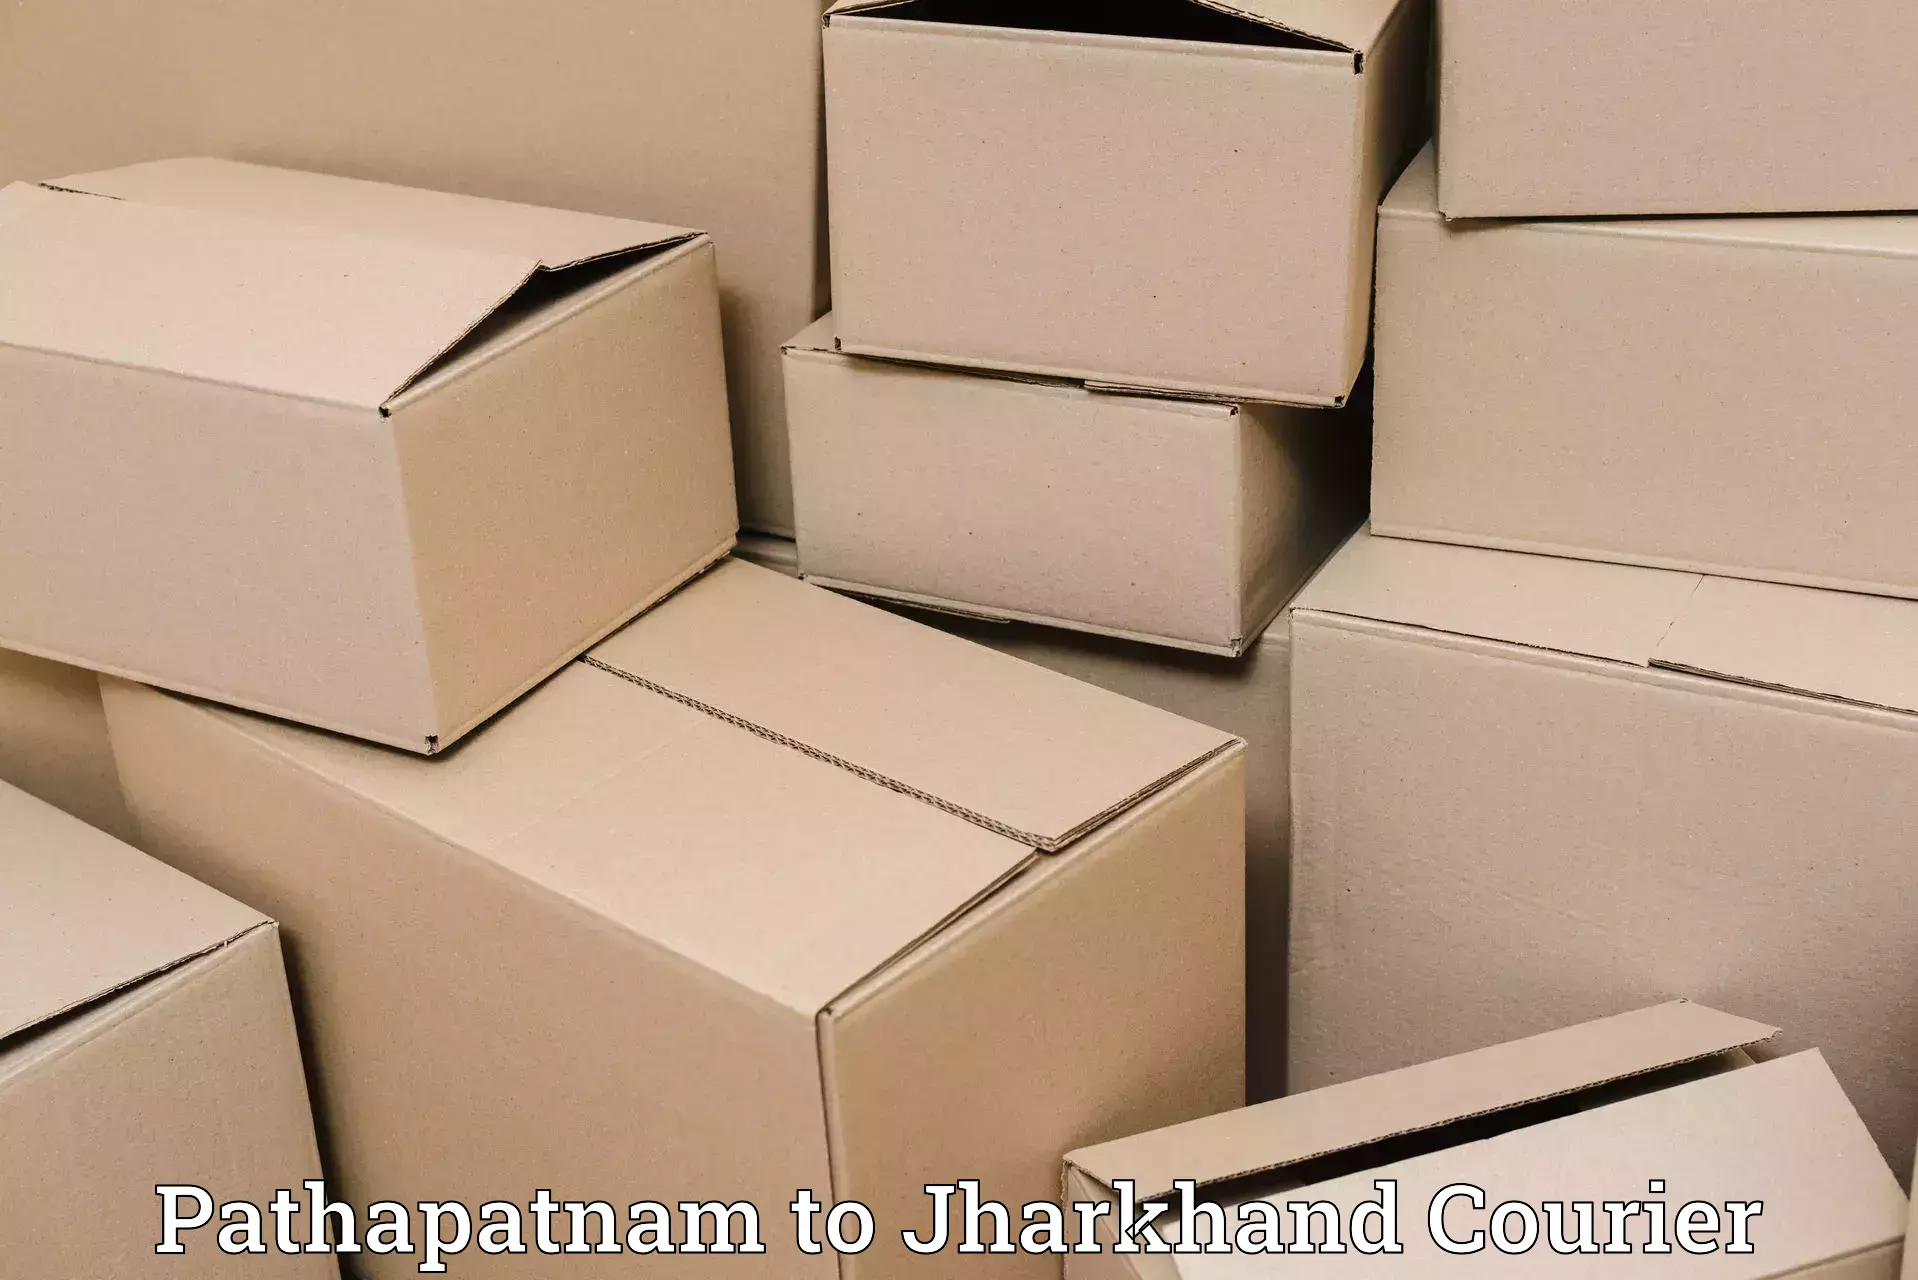 24/7 courier service Pathapatnam to Chatra